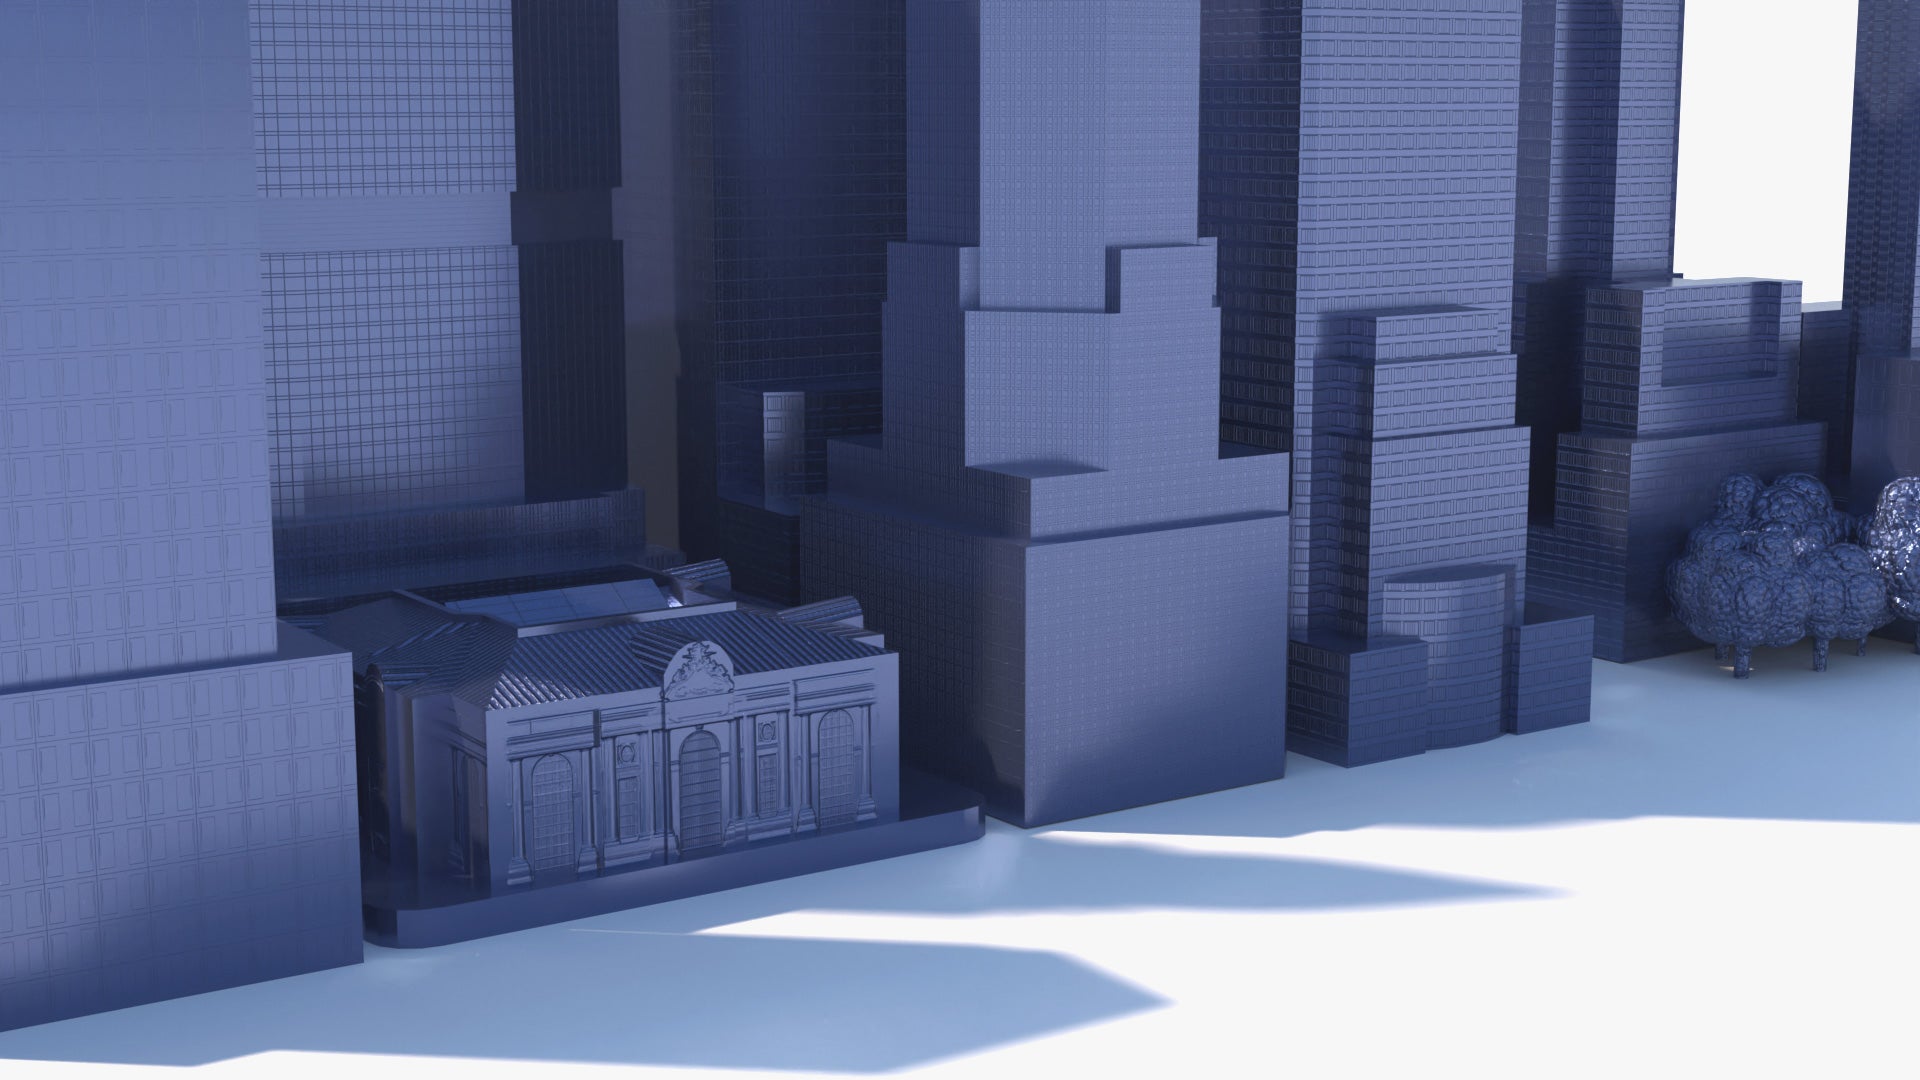 3D model of a miniature New Your City (Manhattan), with all the famous buildings, low polycount and PBR textures.